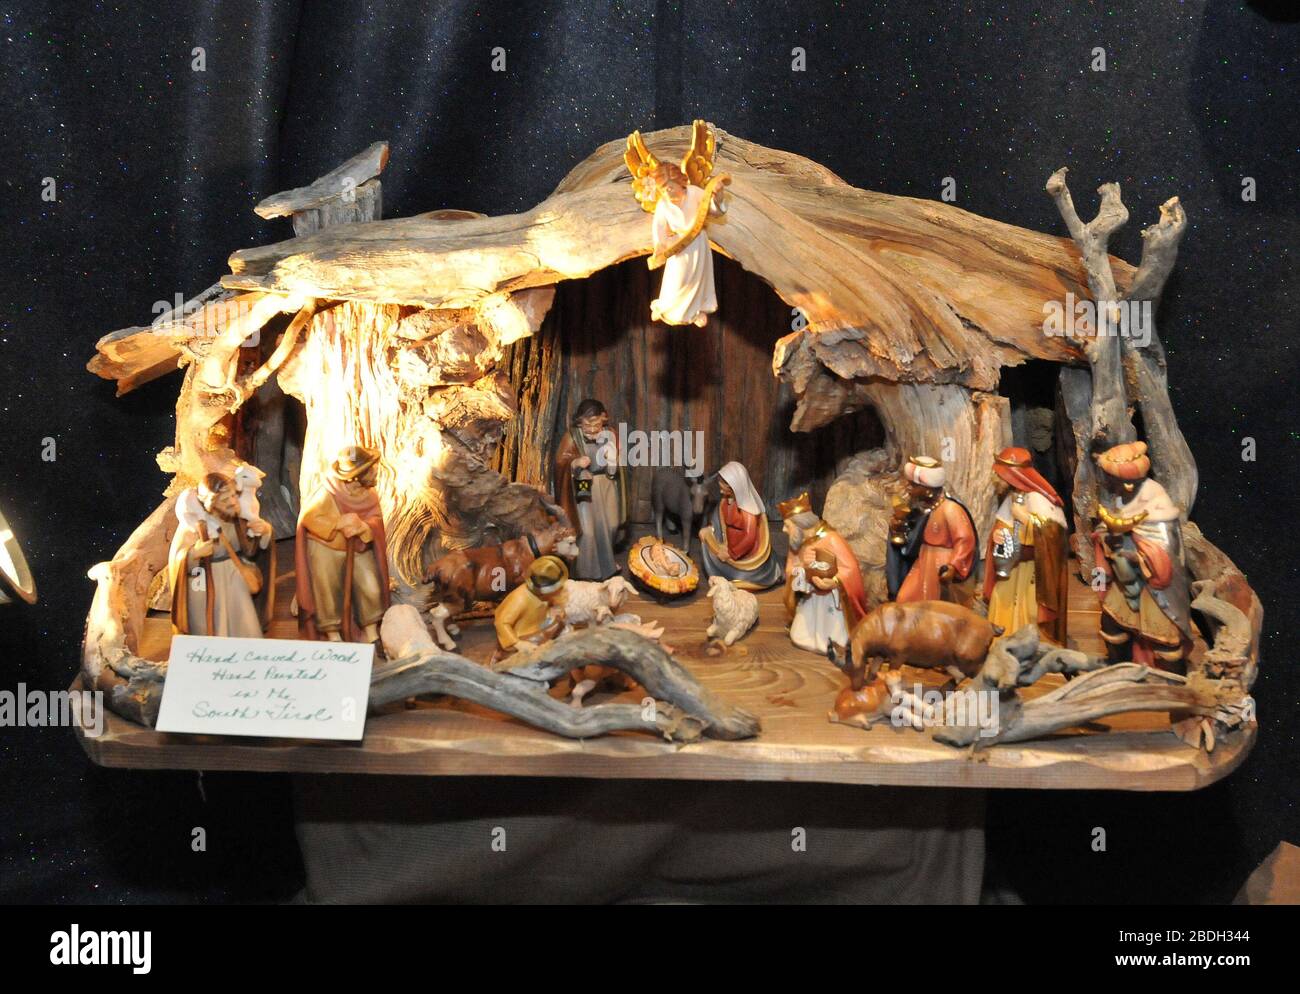 Middleburg, VA - December 12, 2008 -- Interior of The Christmas Sleigh; 5A East Washington, Street; Middleburg, Virginia 20118, owned by Linda Tripp Rausch and her husband, Dieter Rausch showing a handmade wooden creche that is for sale for $ 2,200.00 on Friday, December 12, 2008.Credit: Ron Sachs / CNP (RESTRICTION: NO New York or New Jersey Newspapers or newspapers within a 75 mile radius of New York City) | usage worldwide Stock Photo